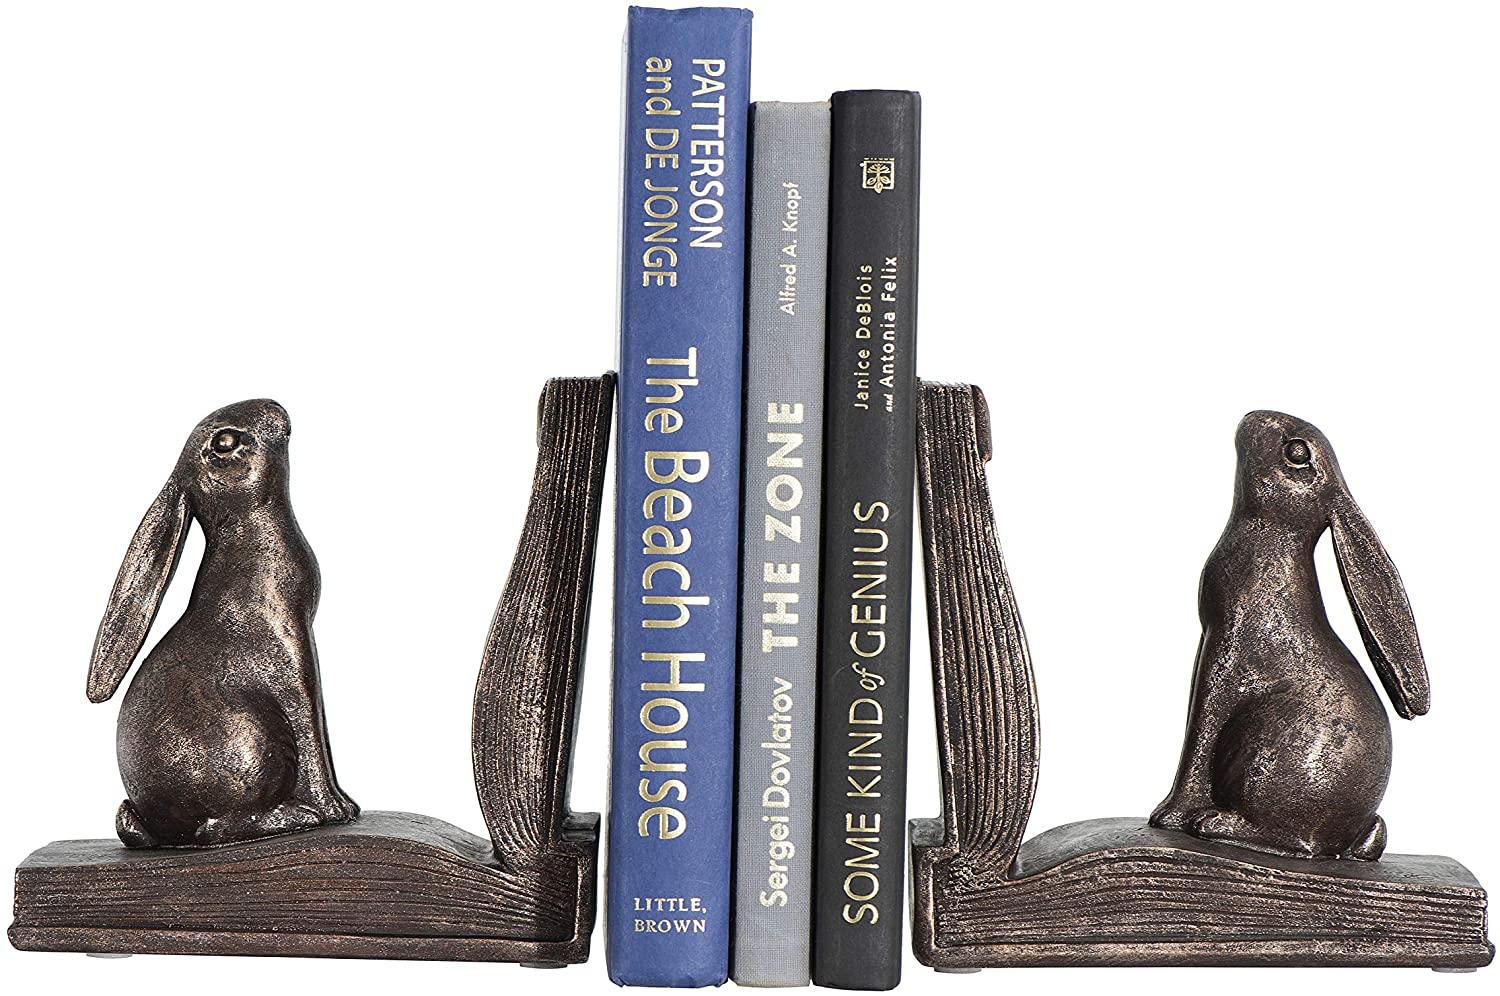 Rustic Bronze Rabbit on Book Resin Bookends (Set of 2 Pieces) - Image 4